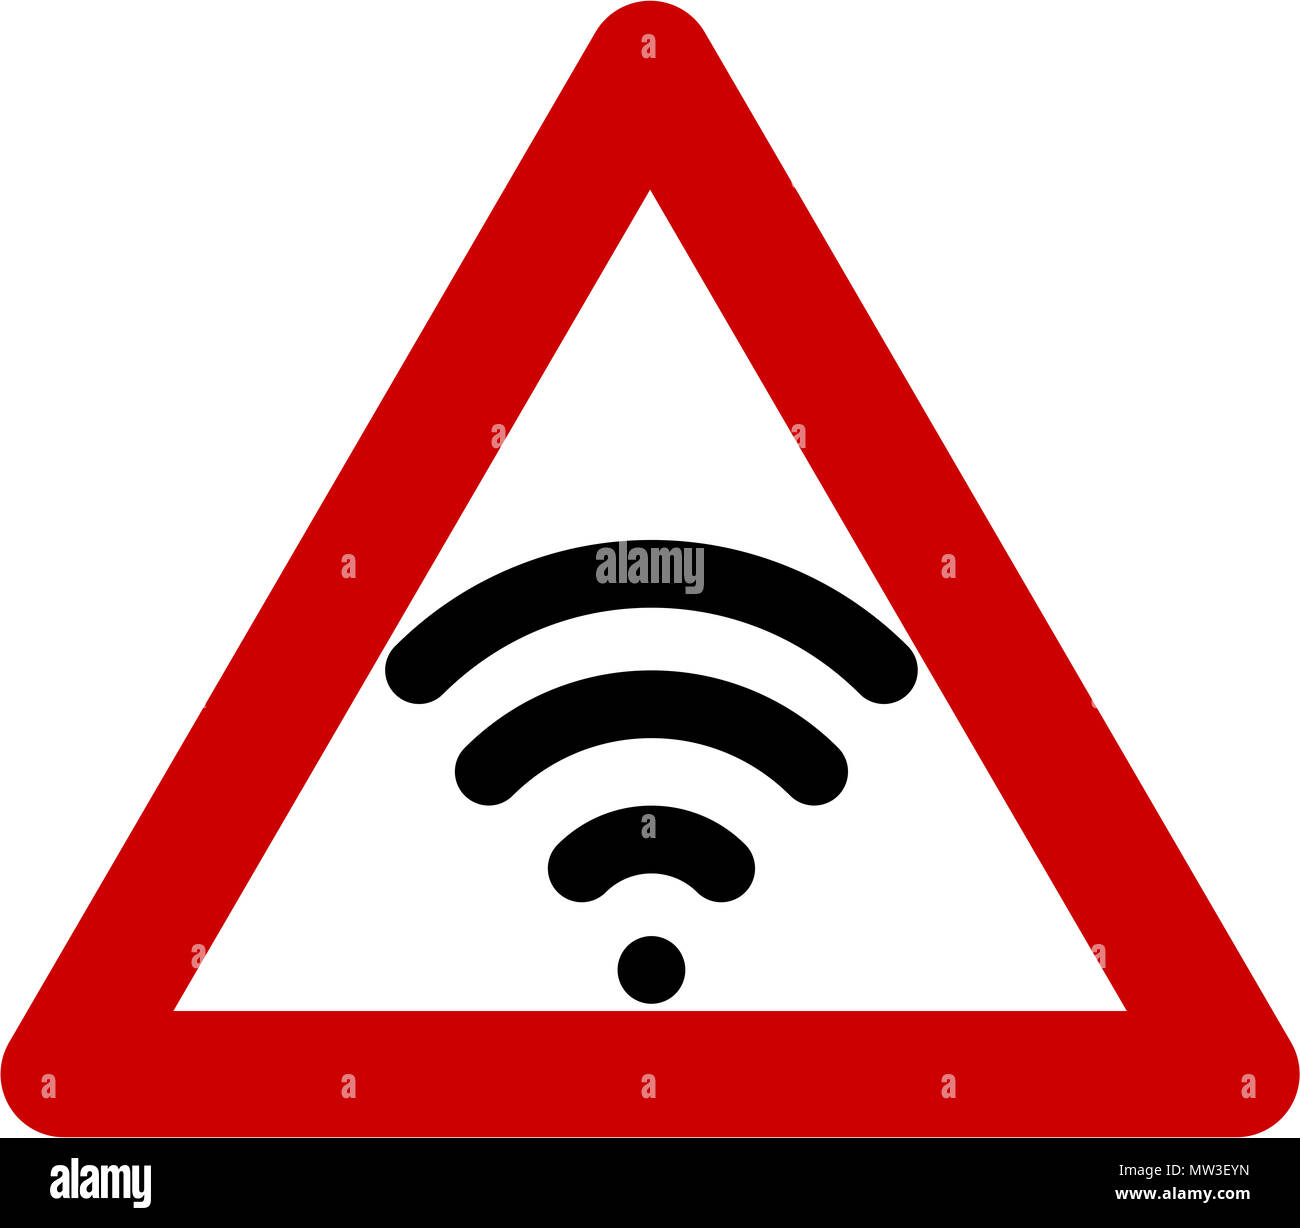 Warning sign with wireless symbol Stock Photo